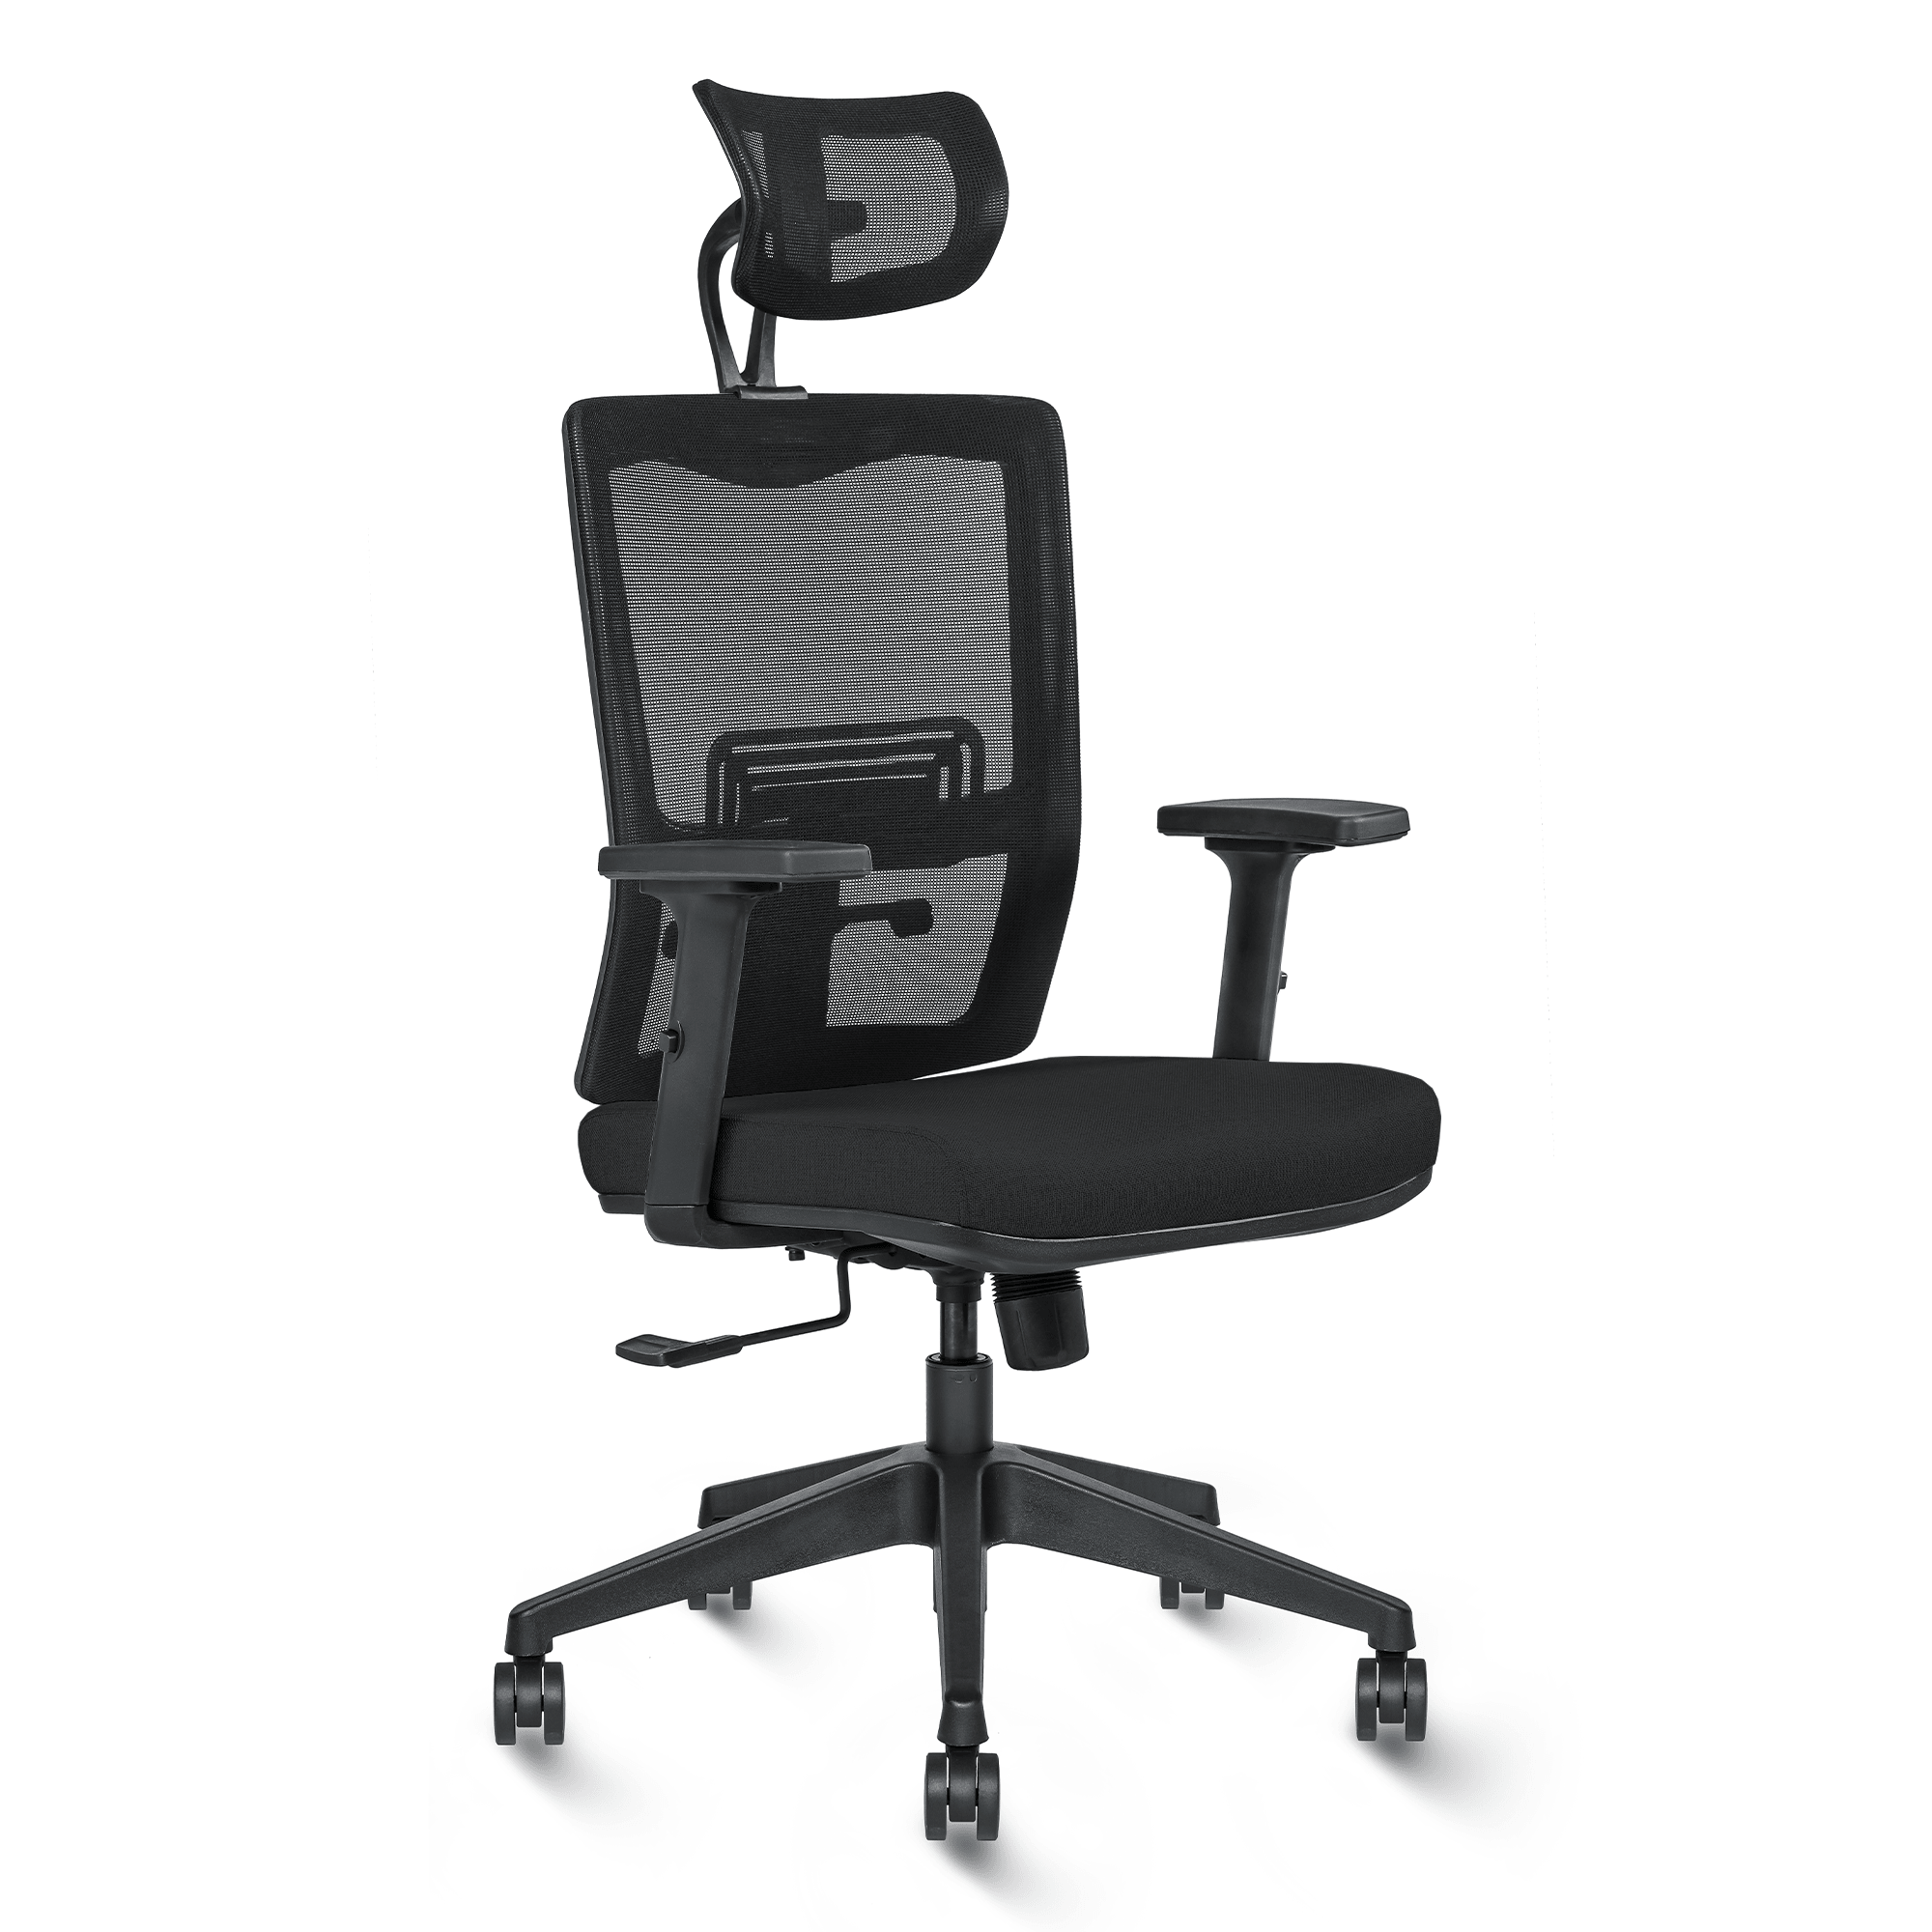 ZAP High Back LX (Black Chair) - Exclusiff Seating Sytems